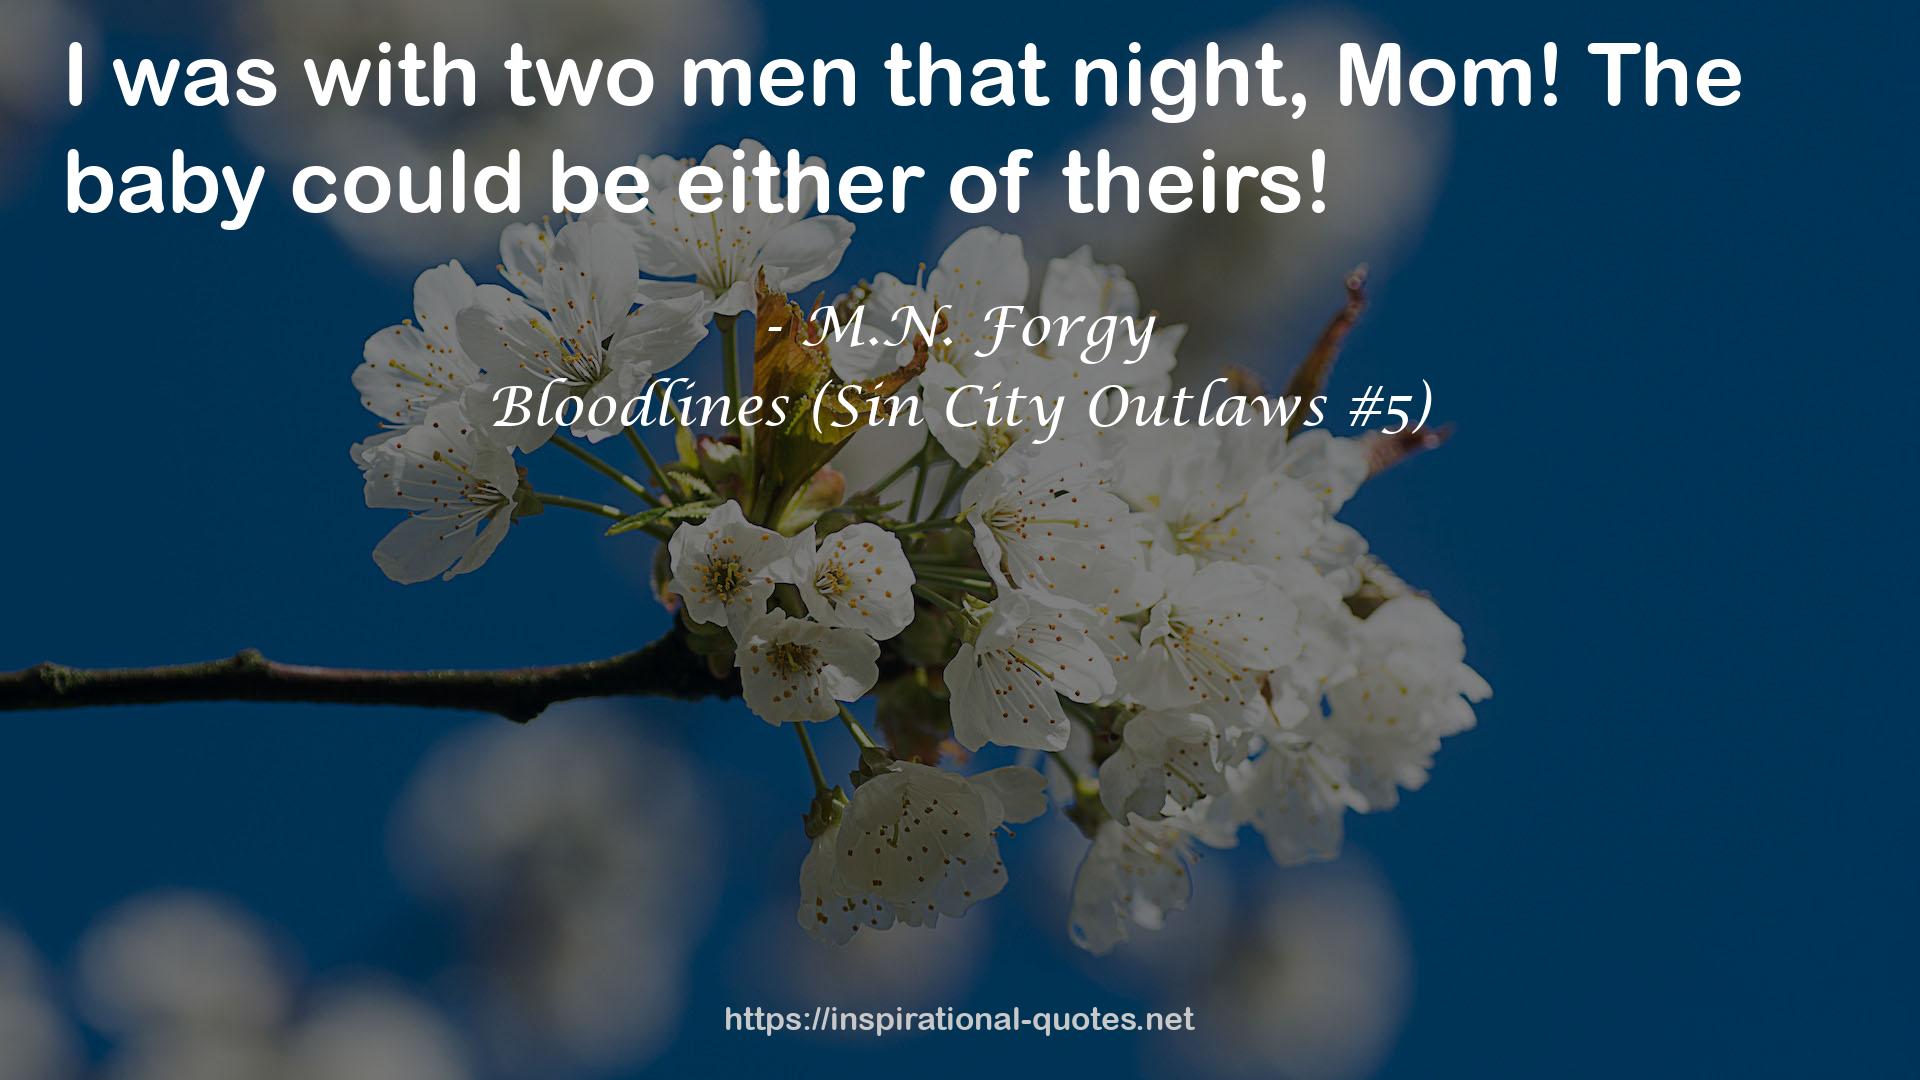 Bloodlines (Sin City Outlaws #5) QUOTES